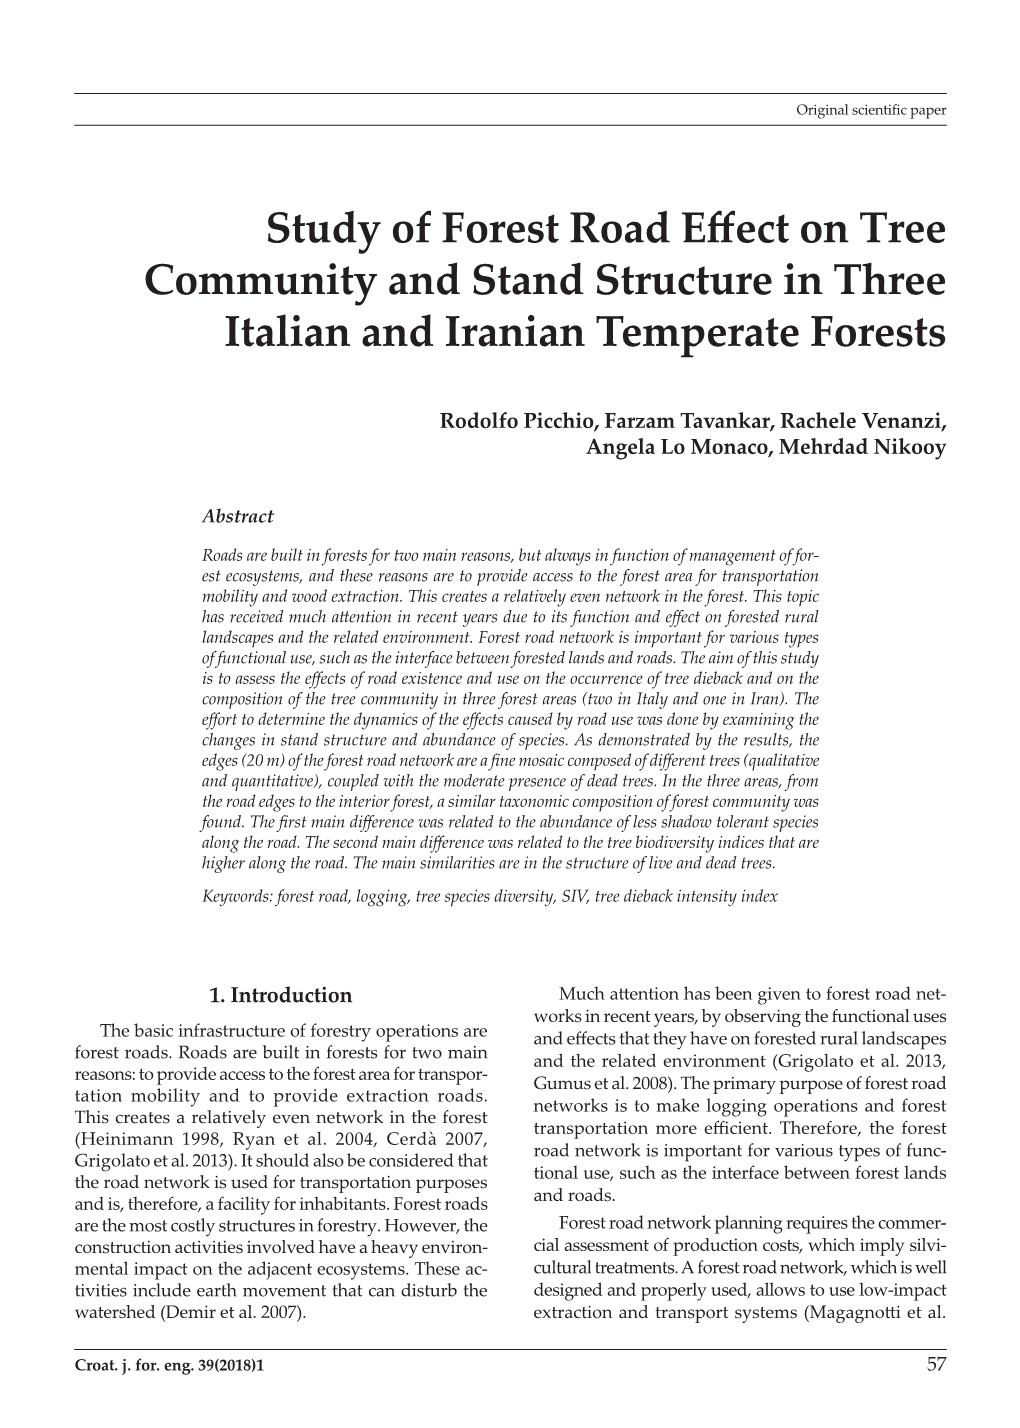 Study of Forest Road Effect on Tree Community and Stand Structure in Three Italian and Iranian Temperate Forests